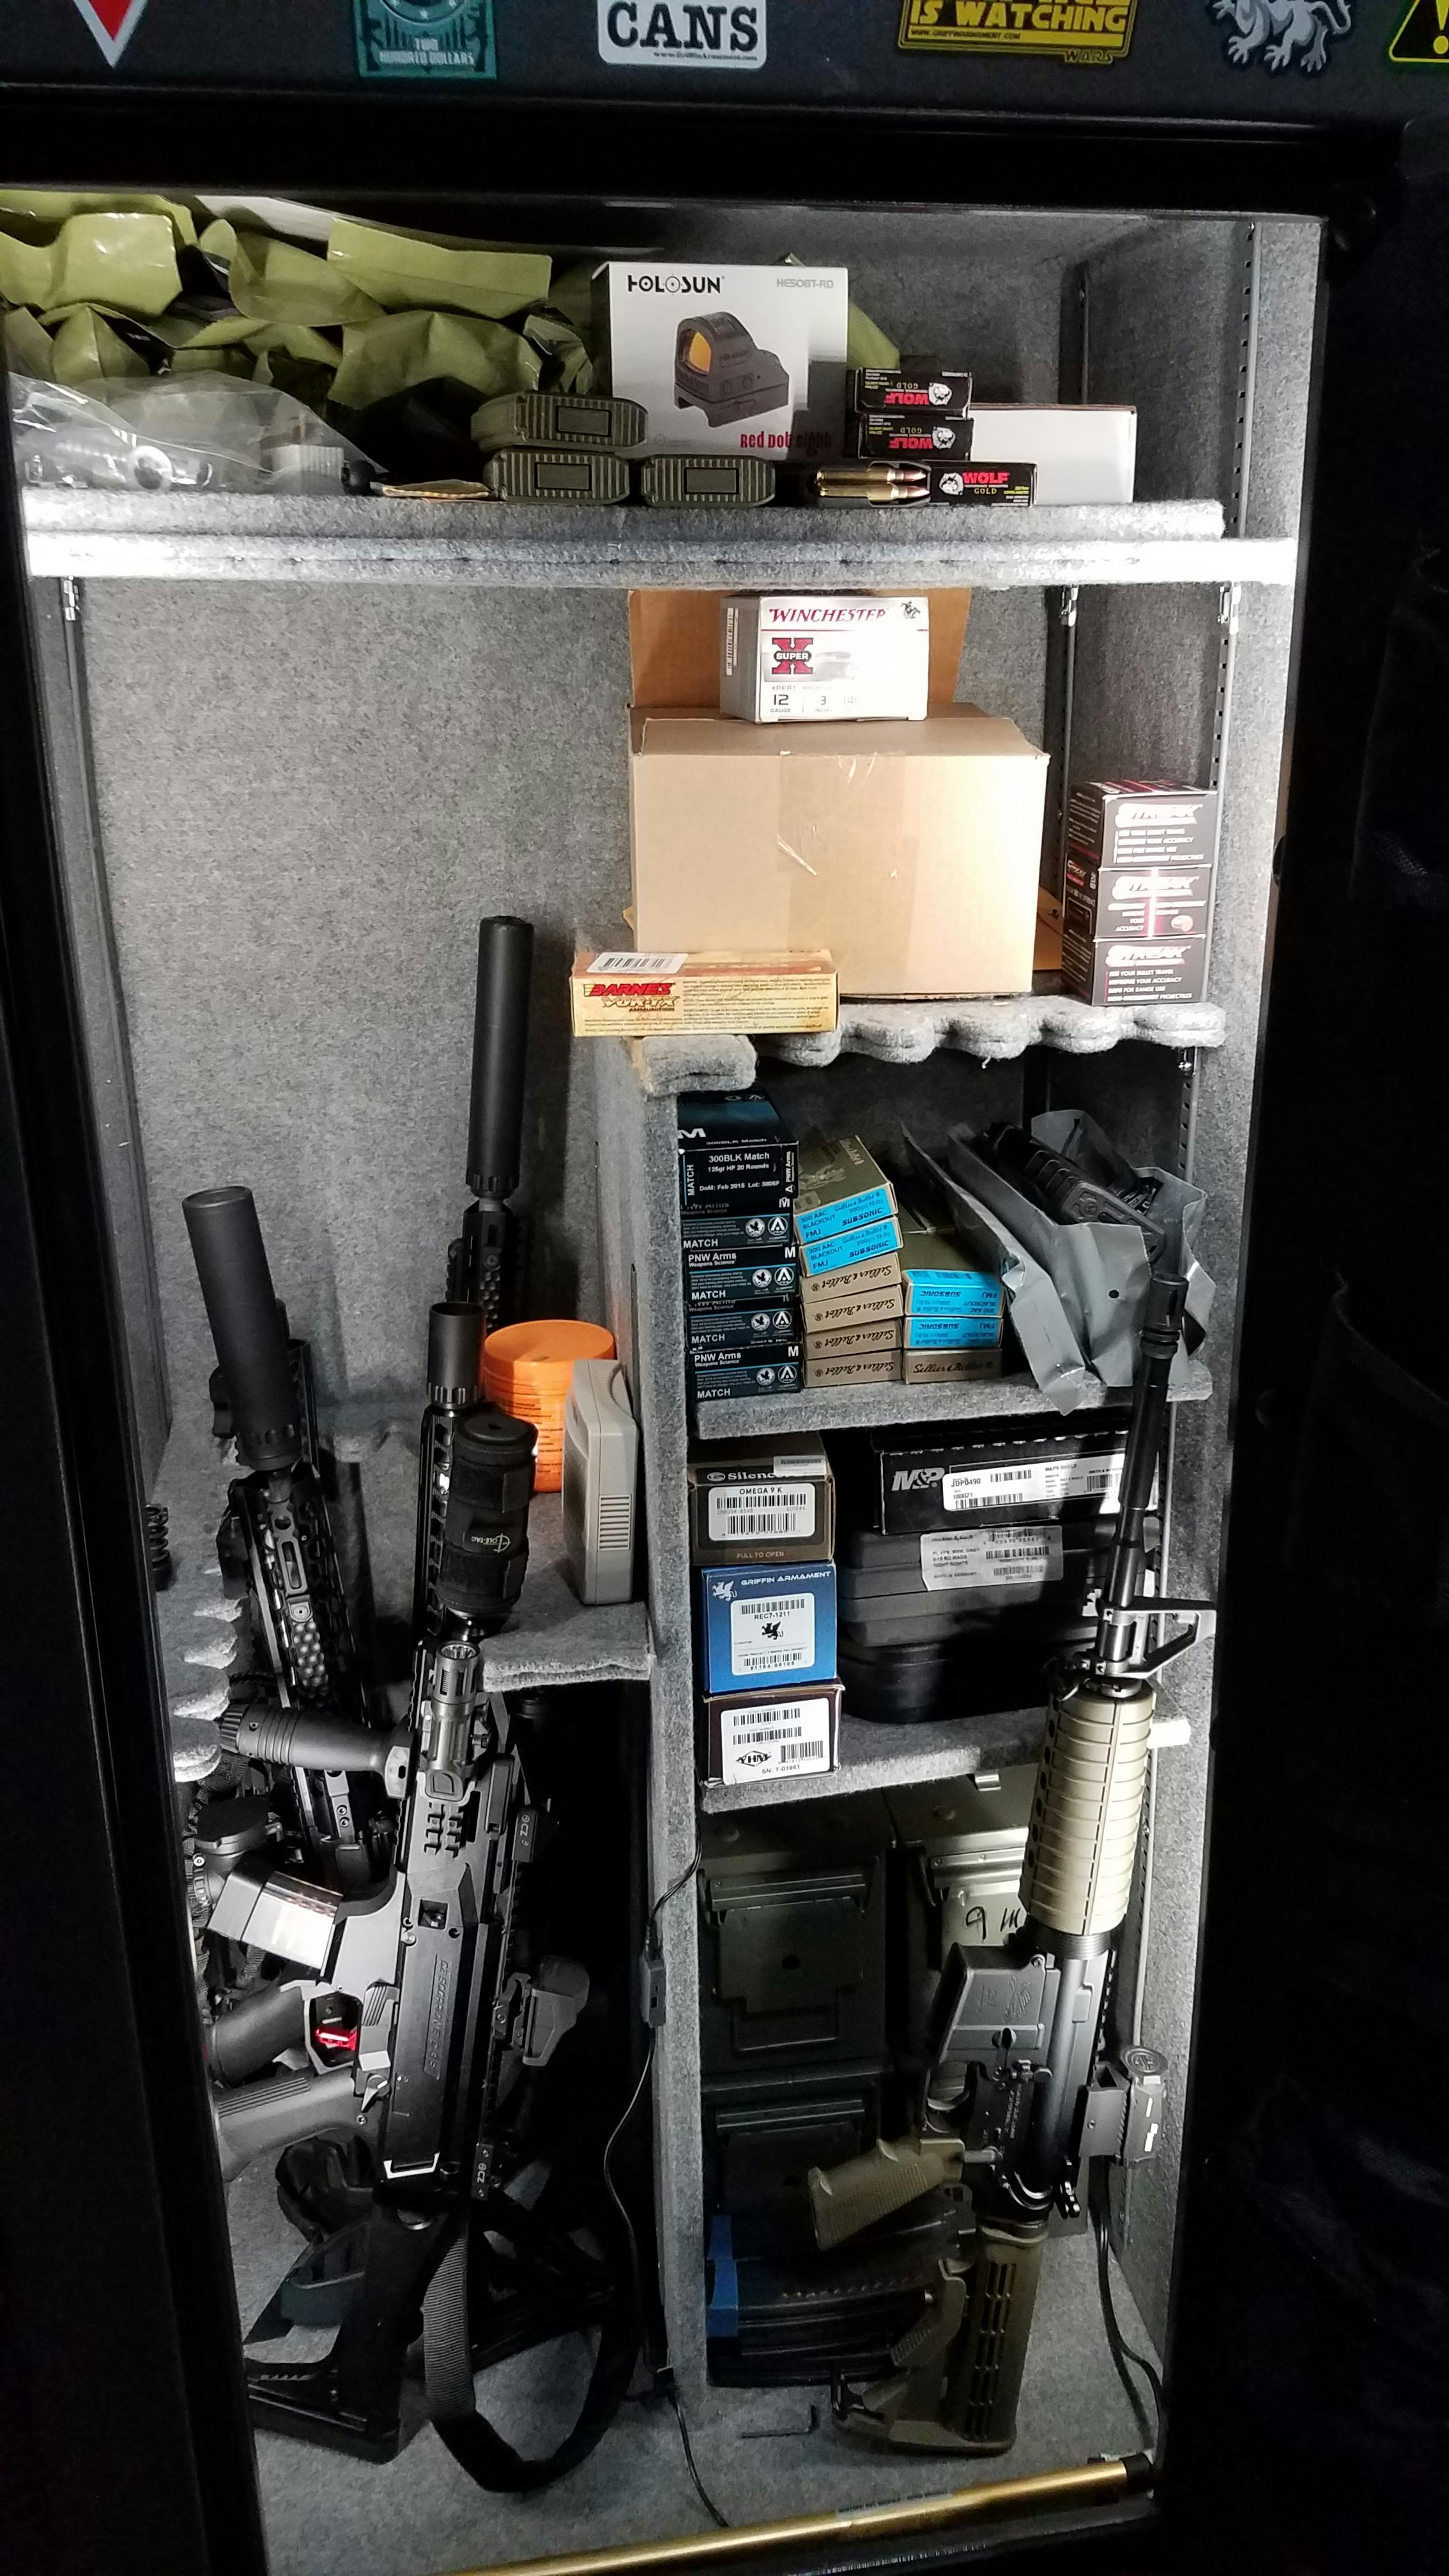 Gun Storage - are you really doing all you can? Or just enough?